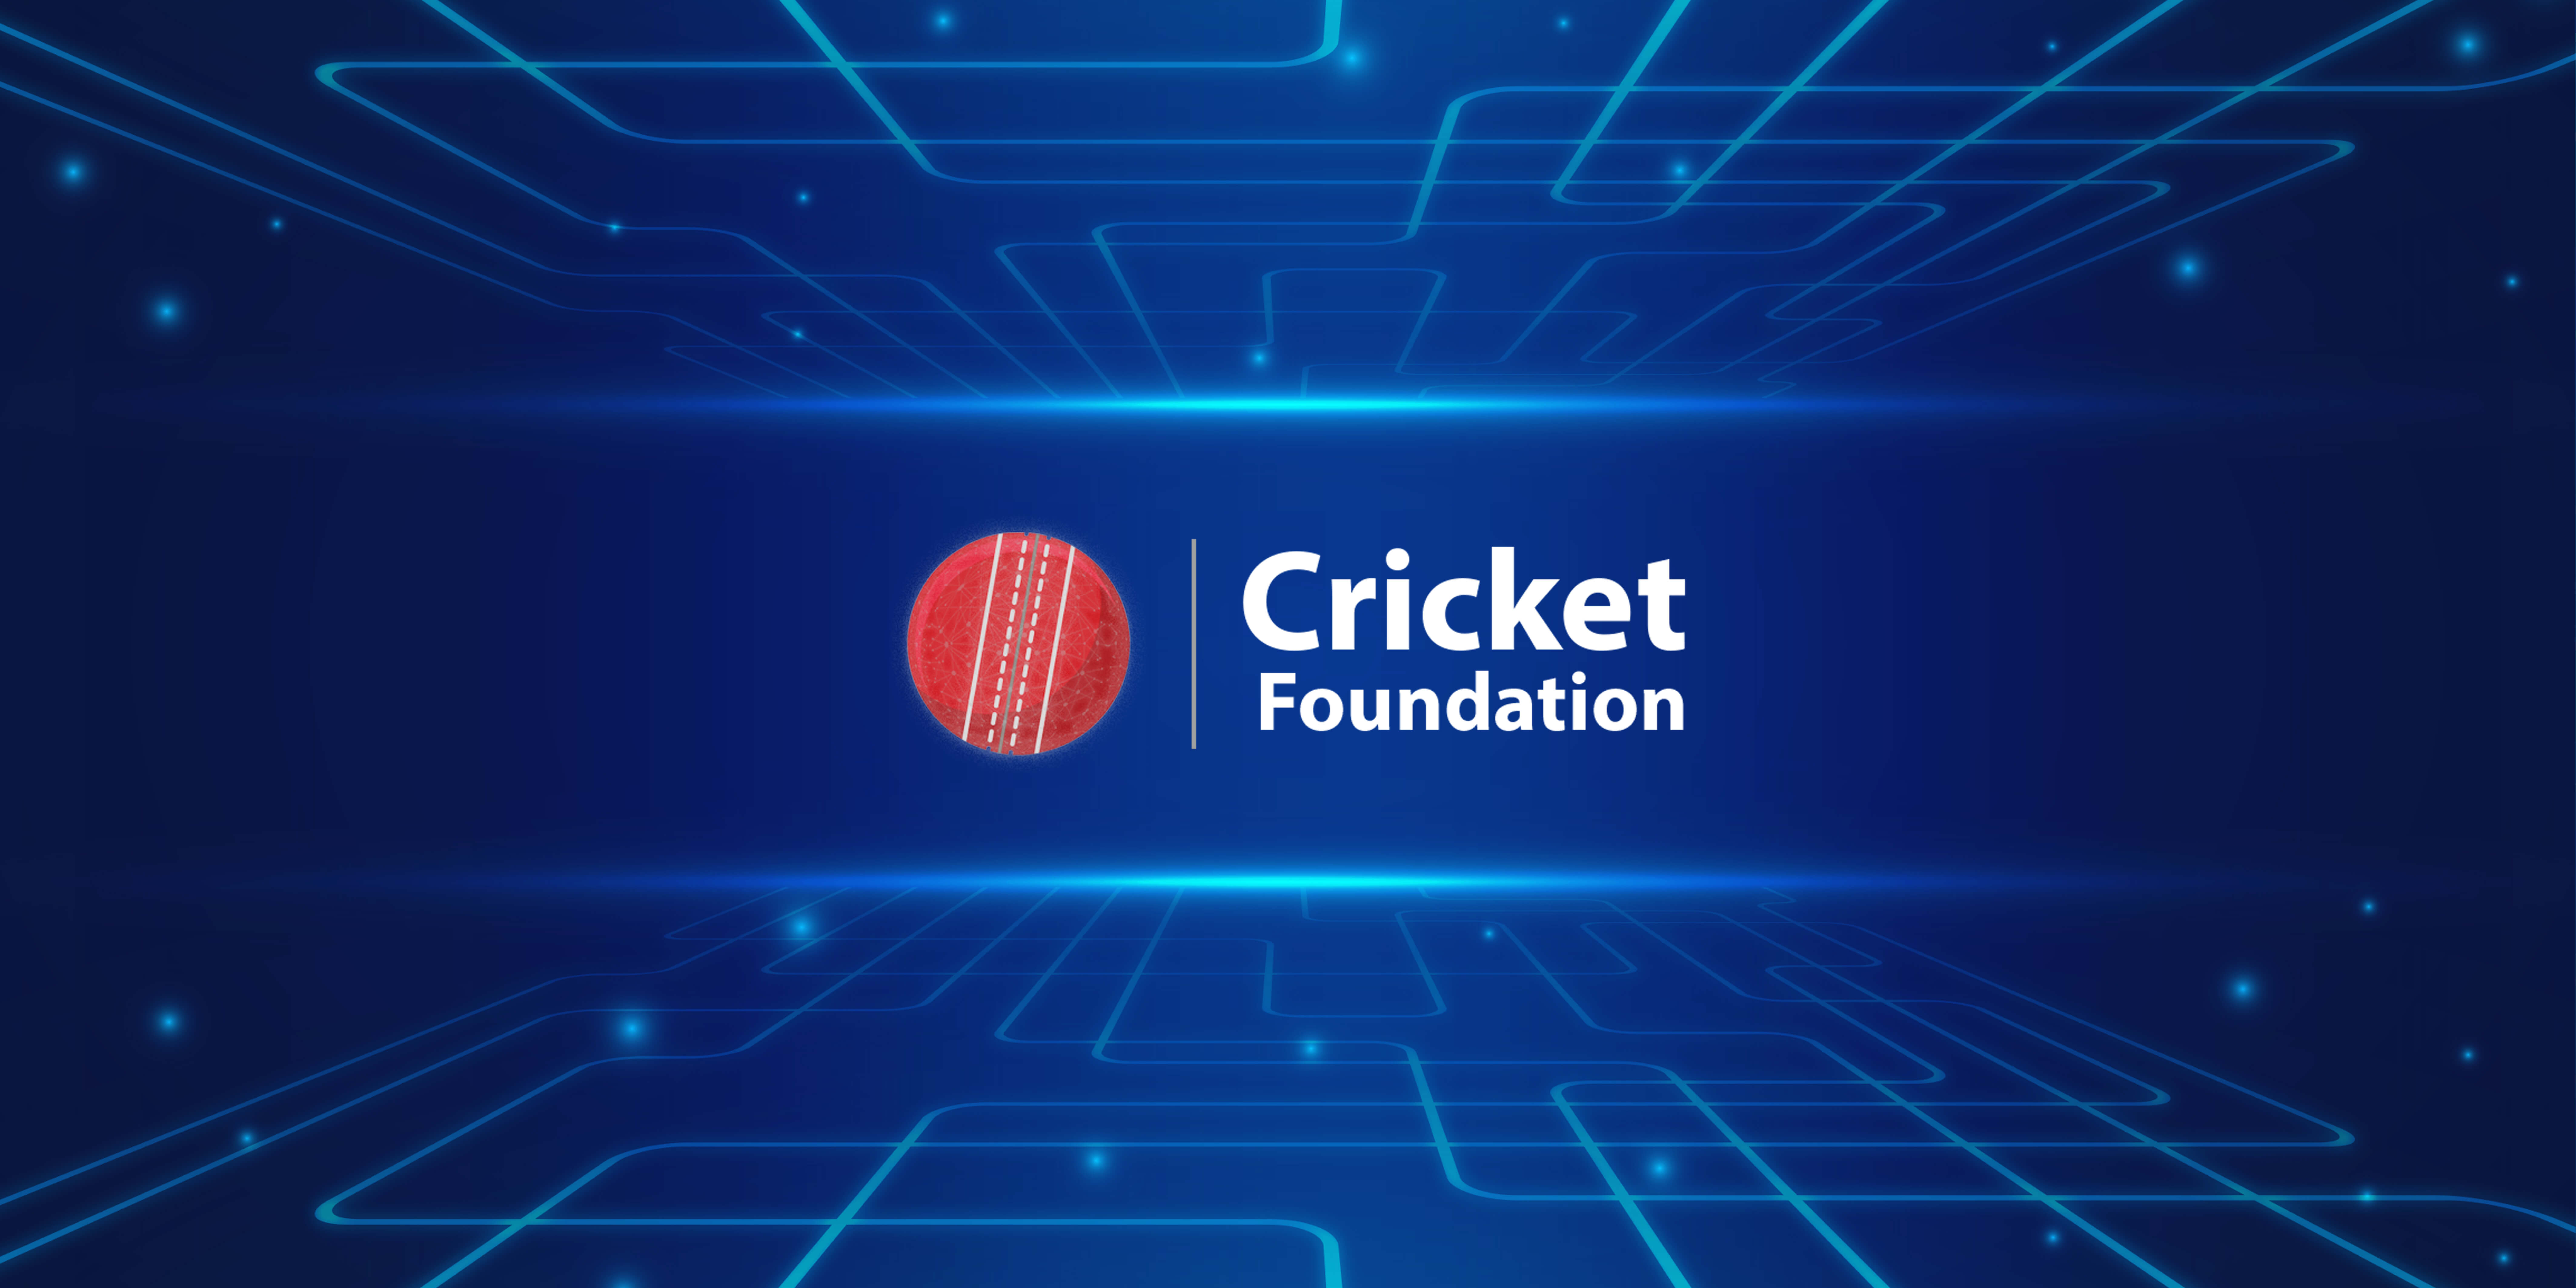 How does Cricket Foundation bring the power of blockchain to cricket?